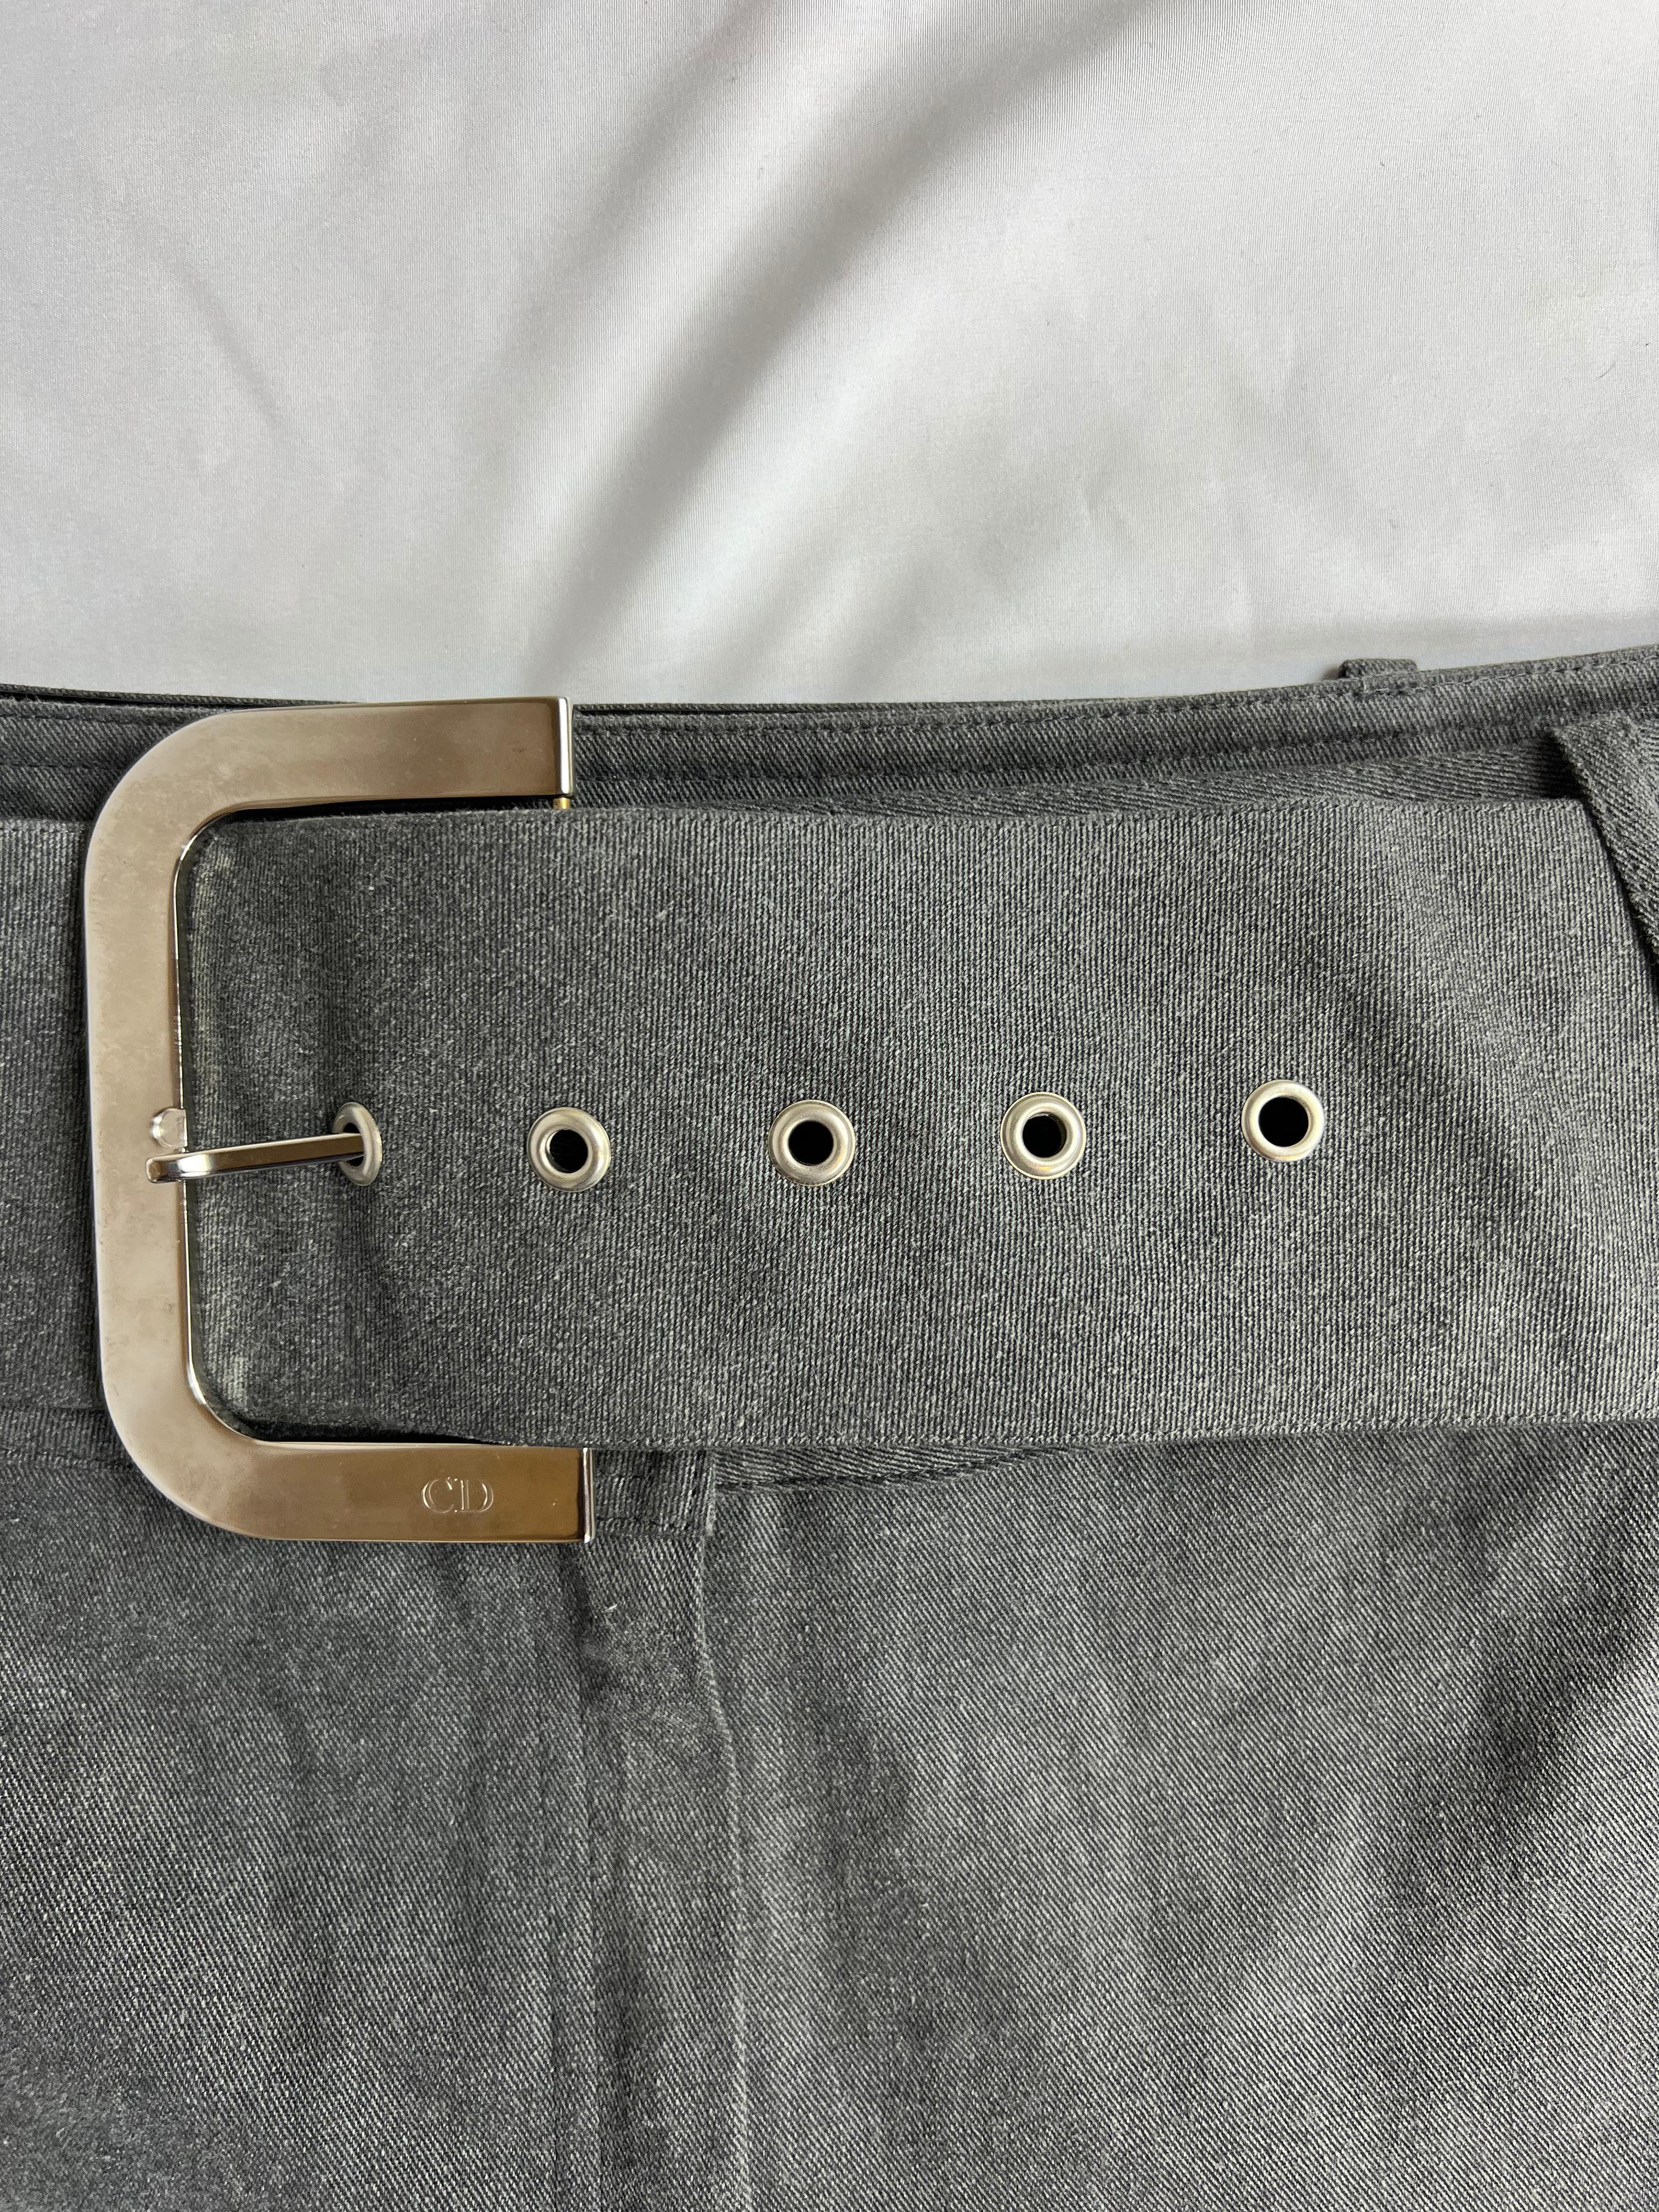 Christian Dior Grey Jeans Pants, Size 10

- Light grey denim wash
- 100% cotton
- Mid raise
- Flare fit
- Side slits
- Wide belt detail
- Silver tone hardware
- Front buttons and zip closure
- Made in France